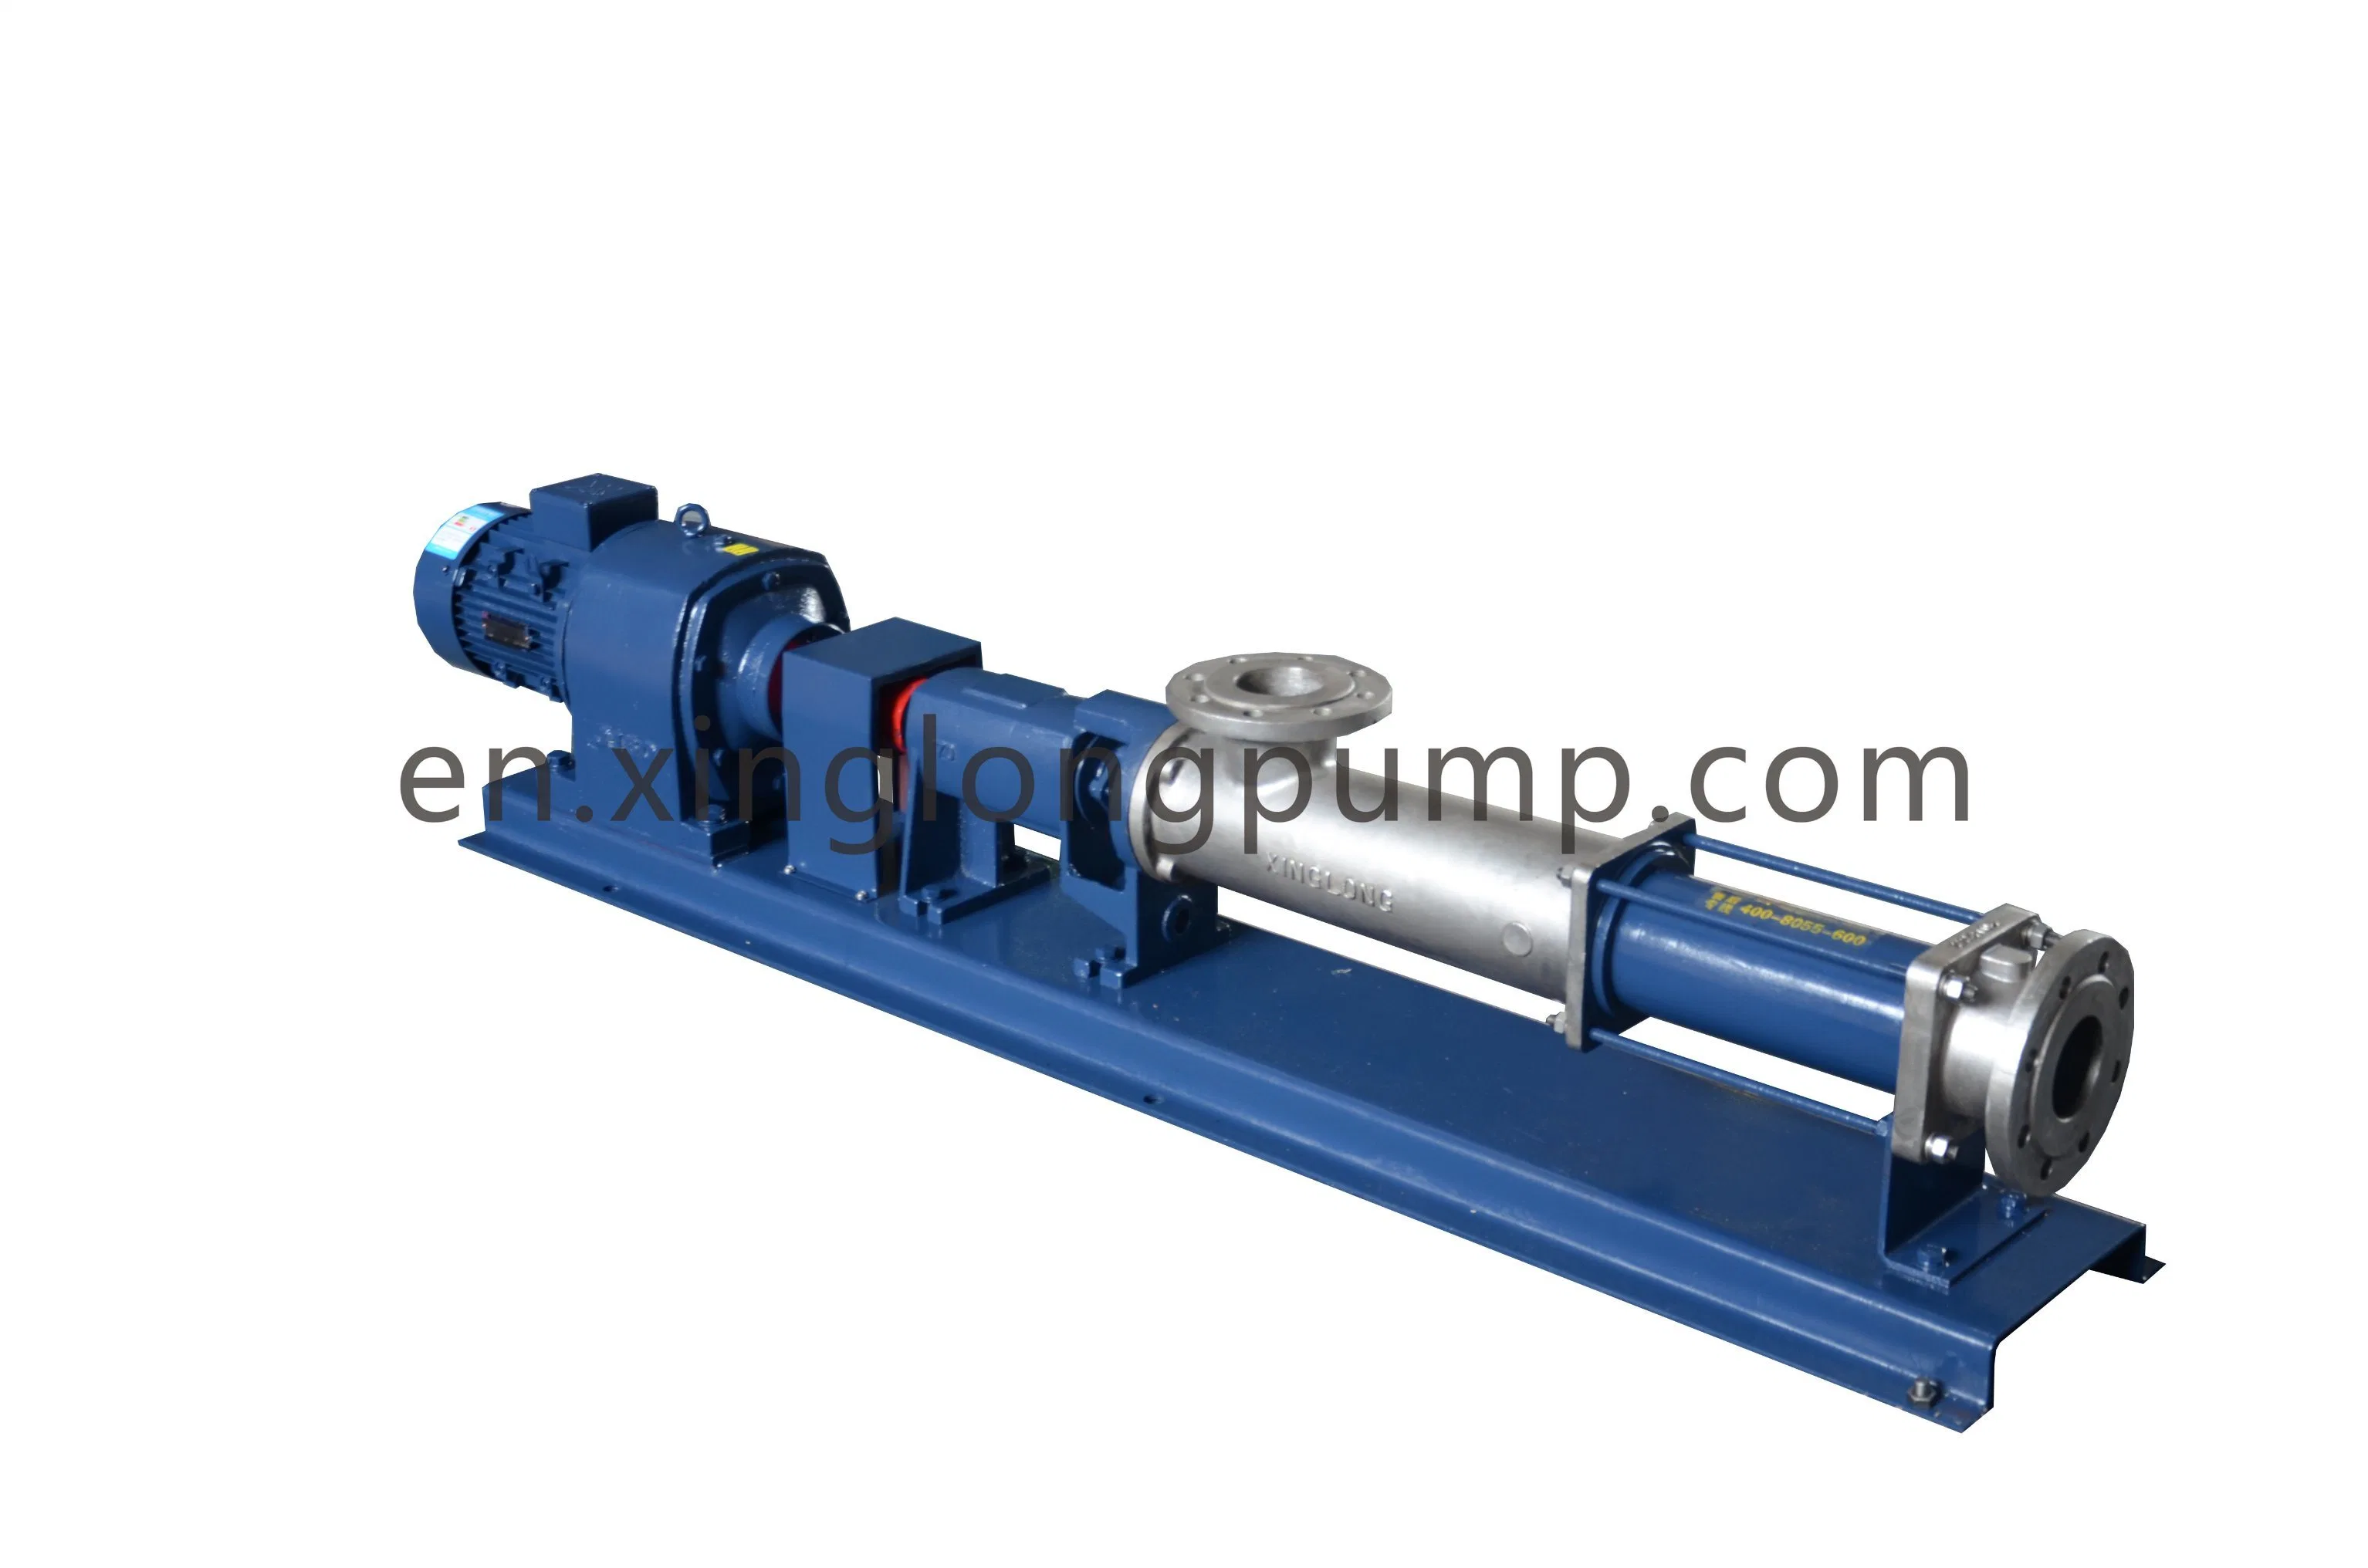 Xinglong Single Screw Pump Stainless Steel Rotor NBR Stator and Other Material